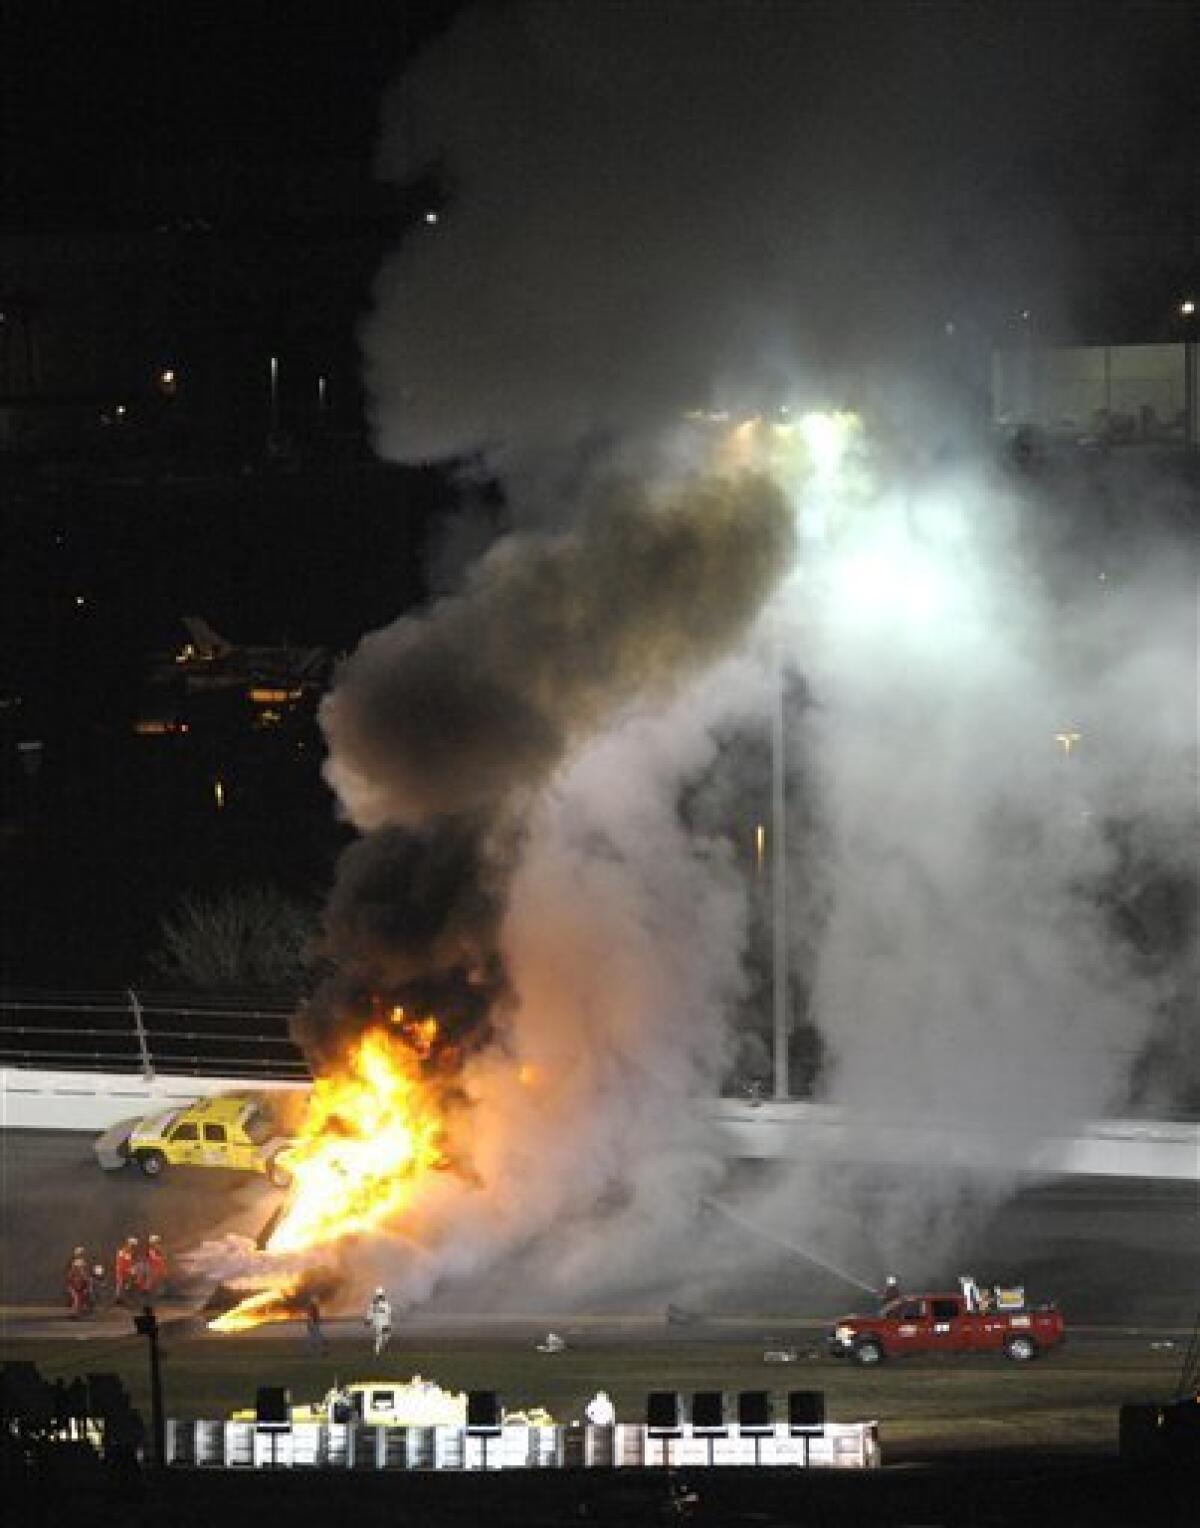 Flames shoot up from burning fuel from a jet dryer after Juan Pablo Montoya's car collided with the dryer during a caution in the NASCAR Daytona 500 auto race at Daytona International Speedway in Daytona Beach, Fla., Monday, Feb. 27, 2012. (AP Photo/Phelan M. Ebenhack)